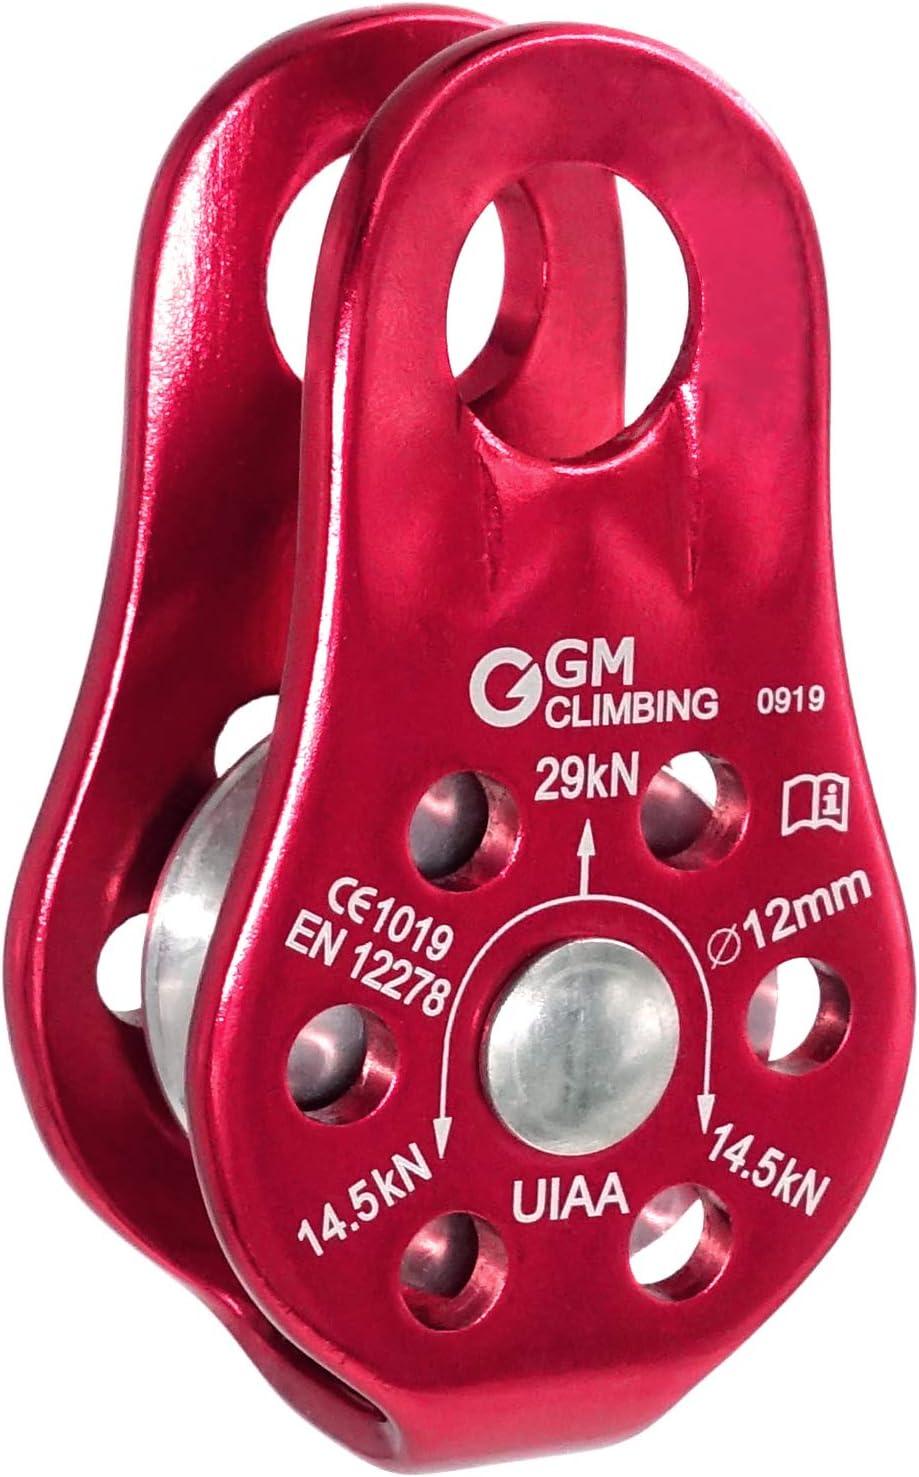 GM CLIMBING 29kN Fixed Micro Pulley CE UIAA Certified Slack Tender